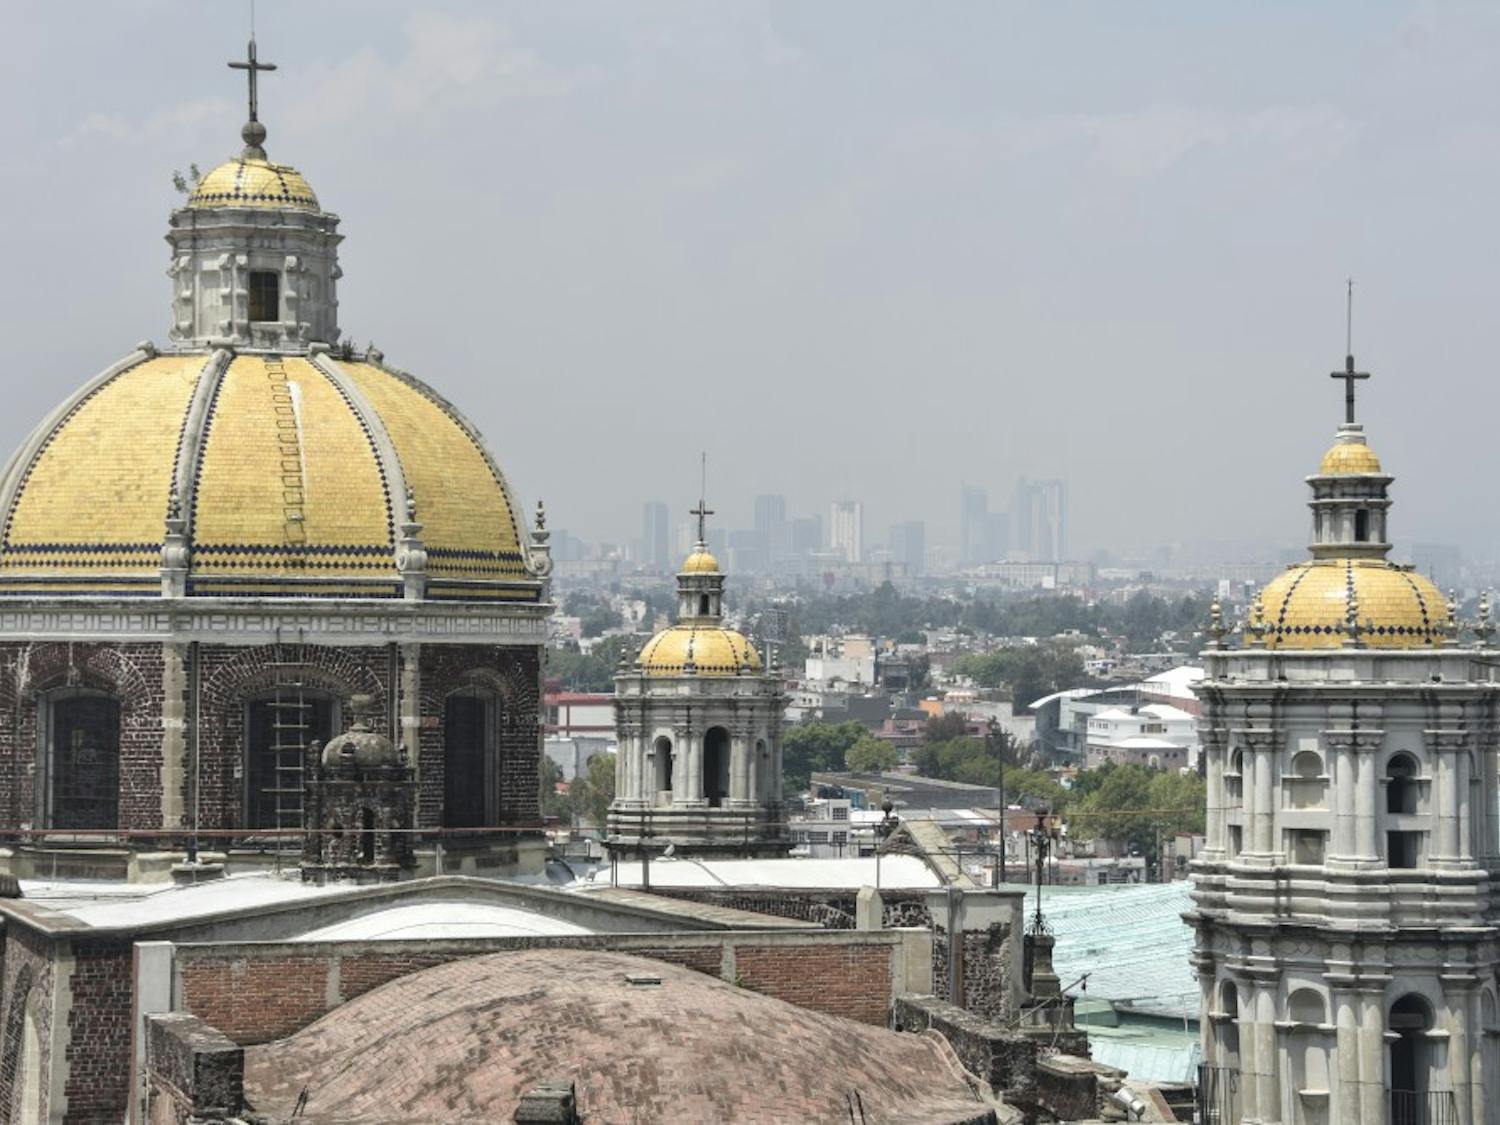 An&nbsp;overlook of Mexico City and churches on&nbsp;July 10, 2018.